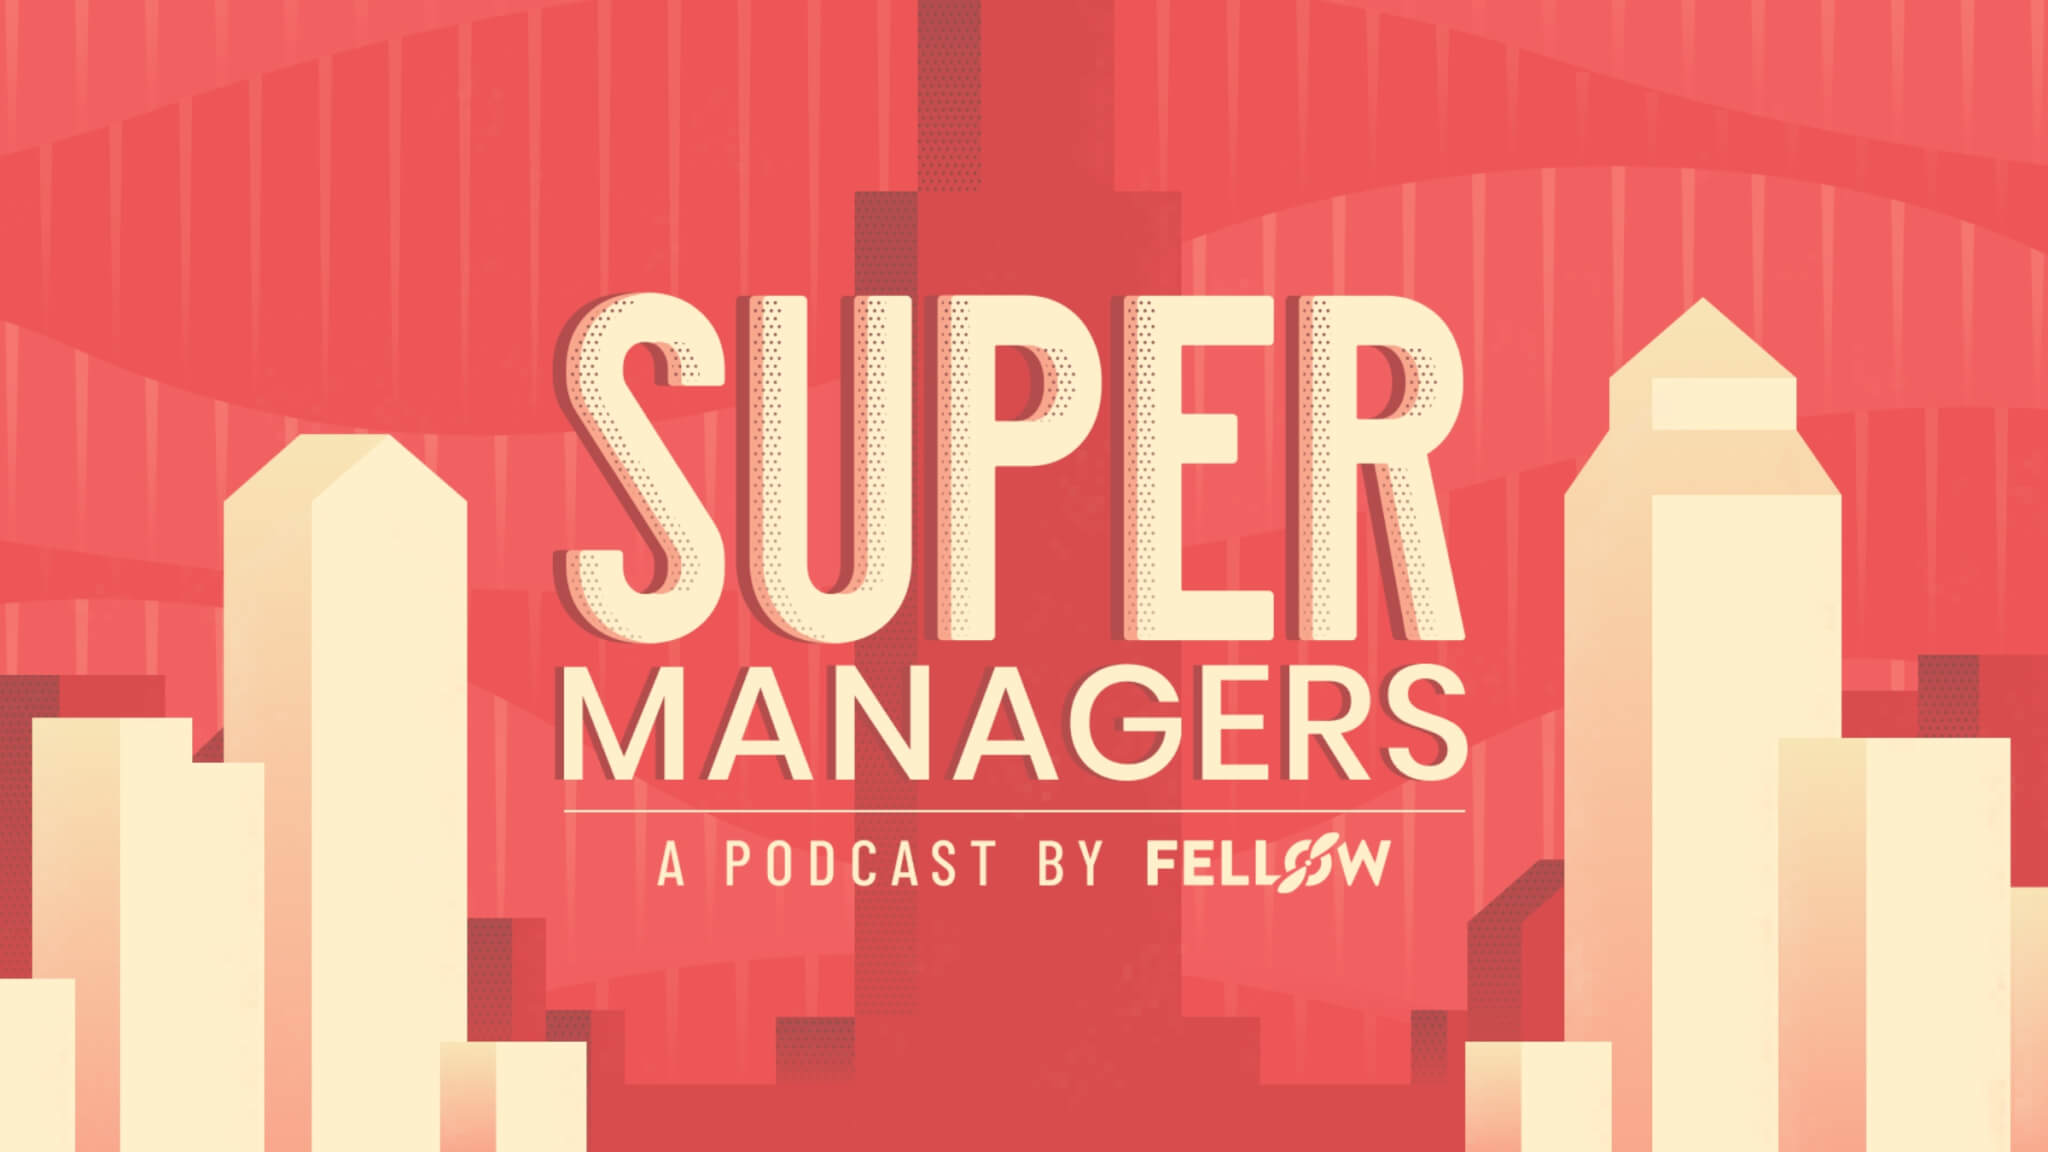 Top 11 Documentation Tips From the Supermanagers Podcast